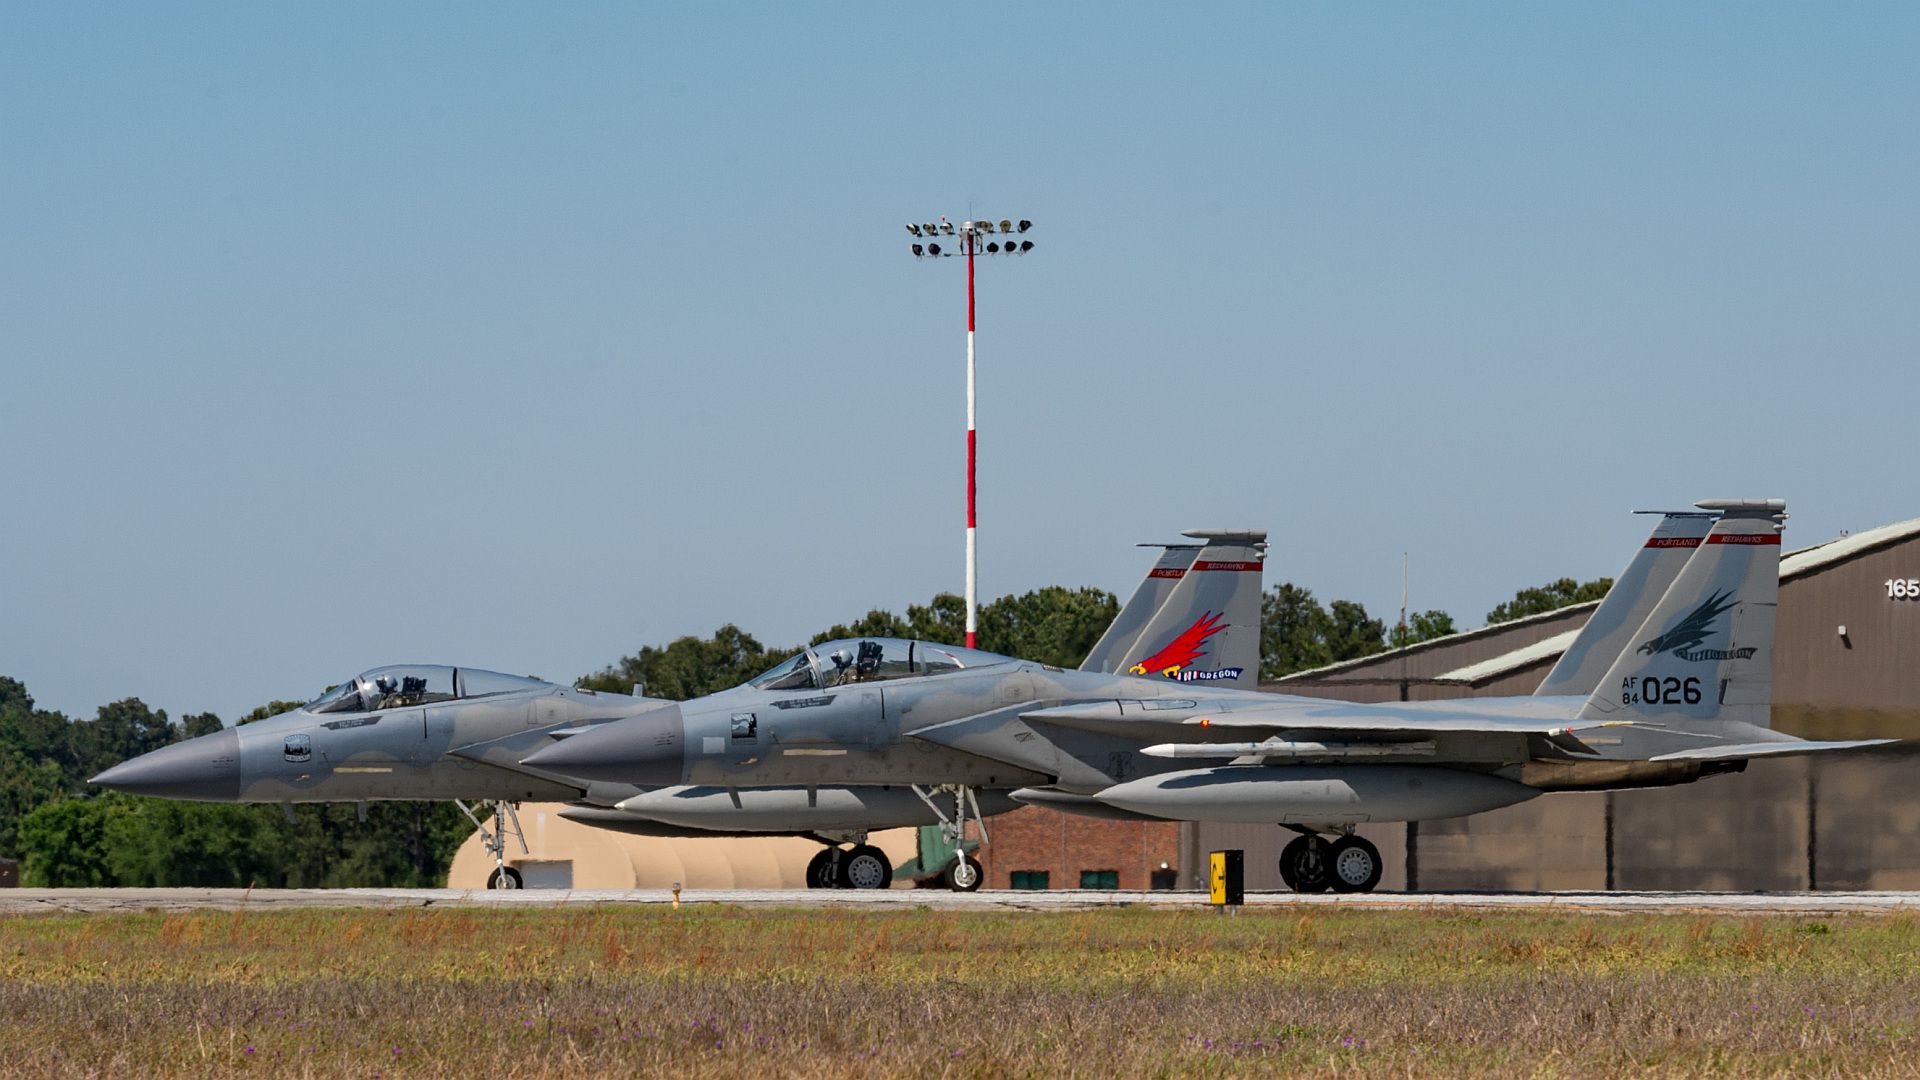 15 Aircraft From Oregon Air National Guard S 142nd Fighter Wing Await Departure At The Air Dominance Center During Sentry Savannah 2021